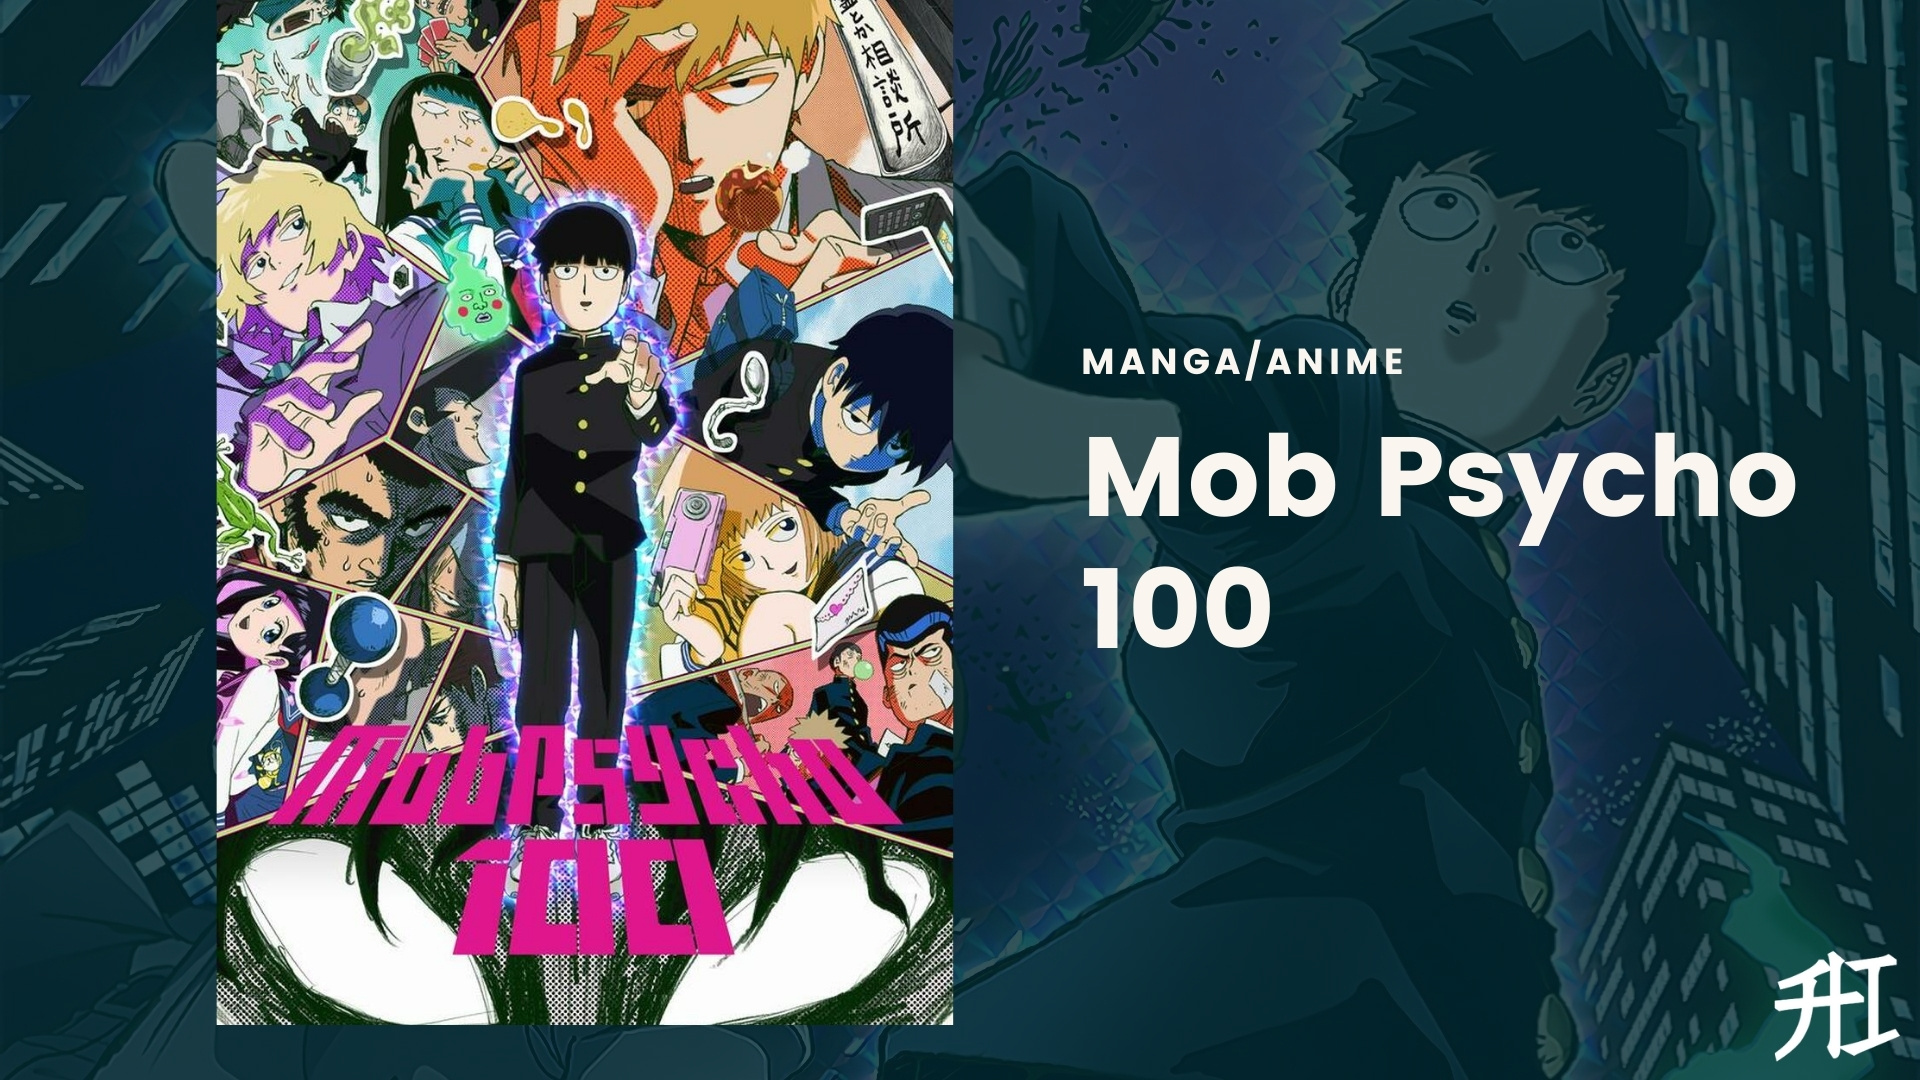 The 13 Best Anime Similar To Noragami